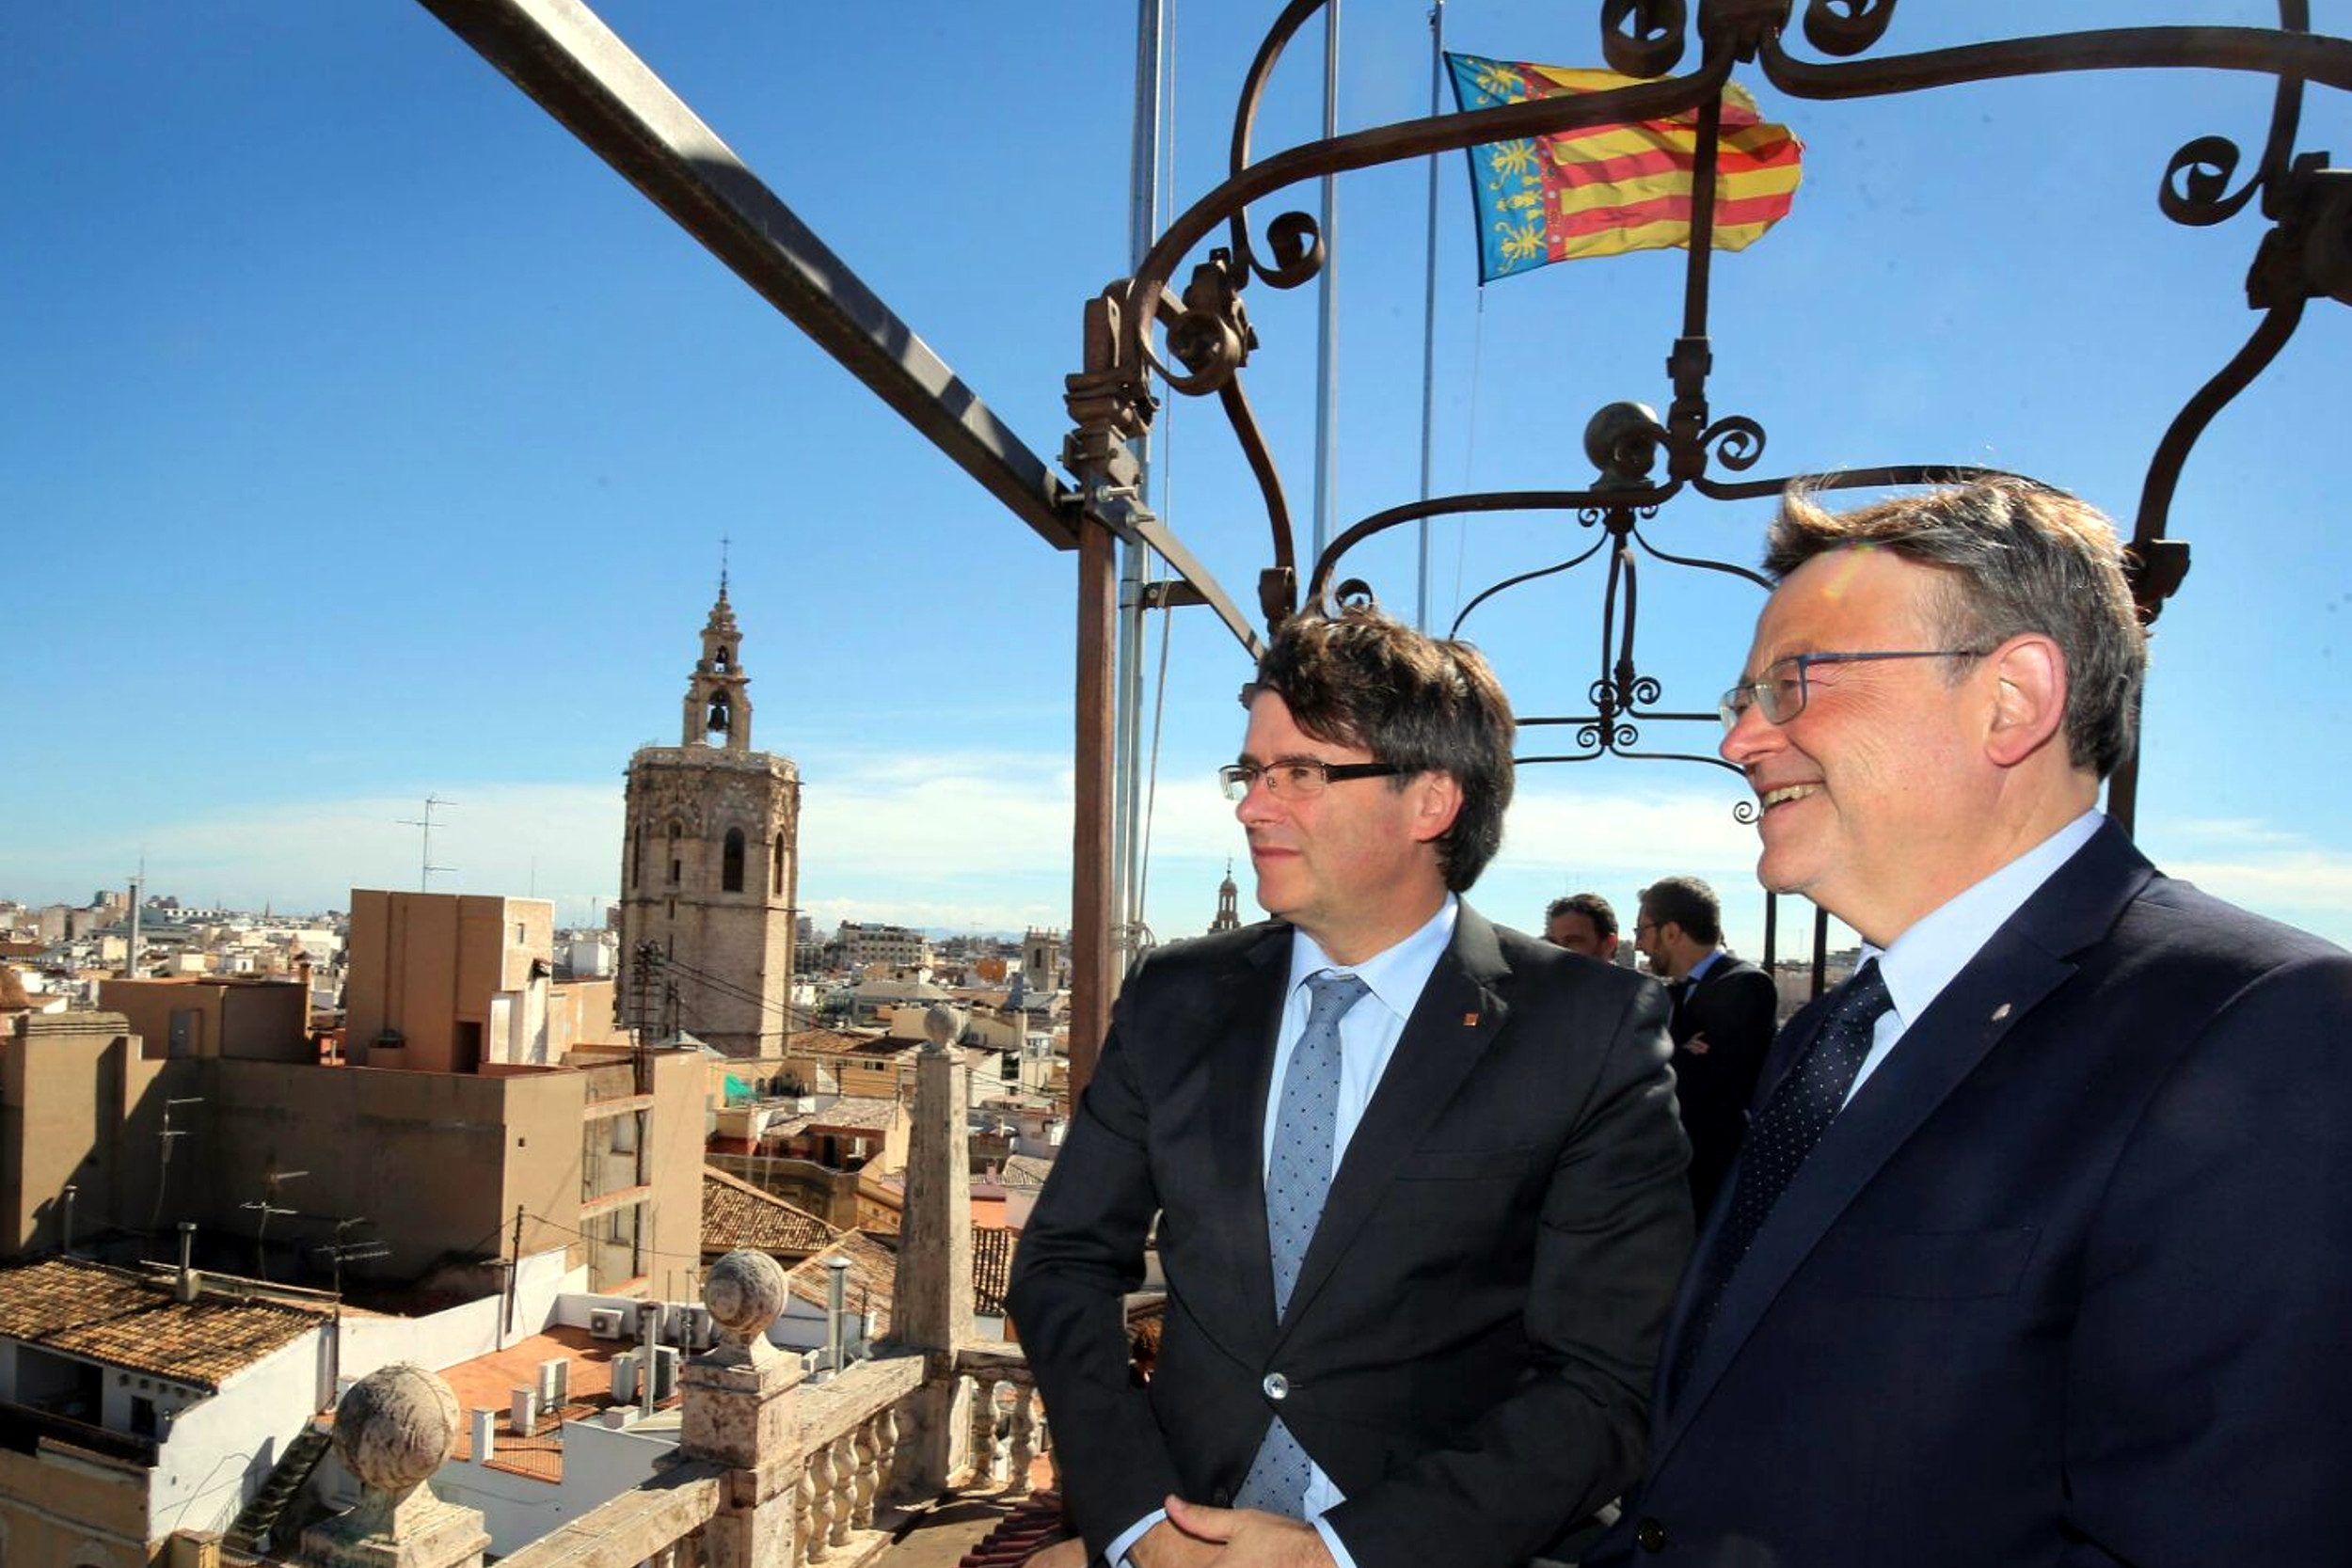 The Catalan President, Carles Puigdemont, and the Valencian President, Ximo Puig (by Generalitat Valenciana)